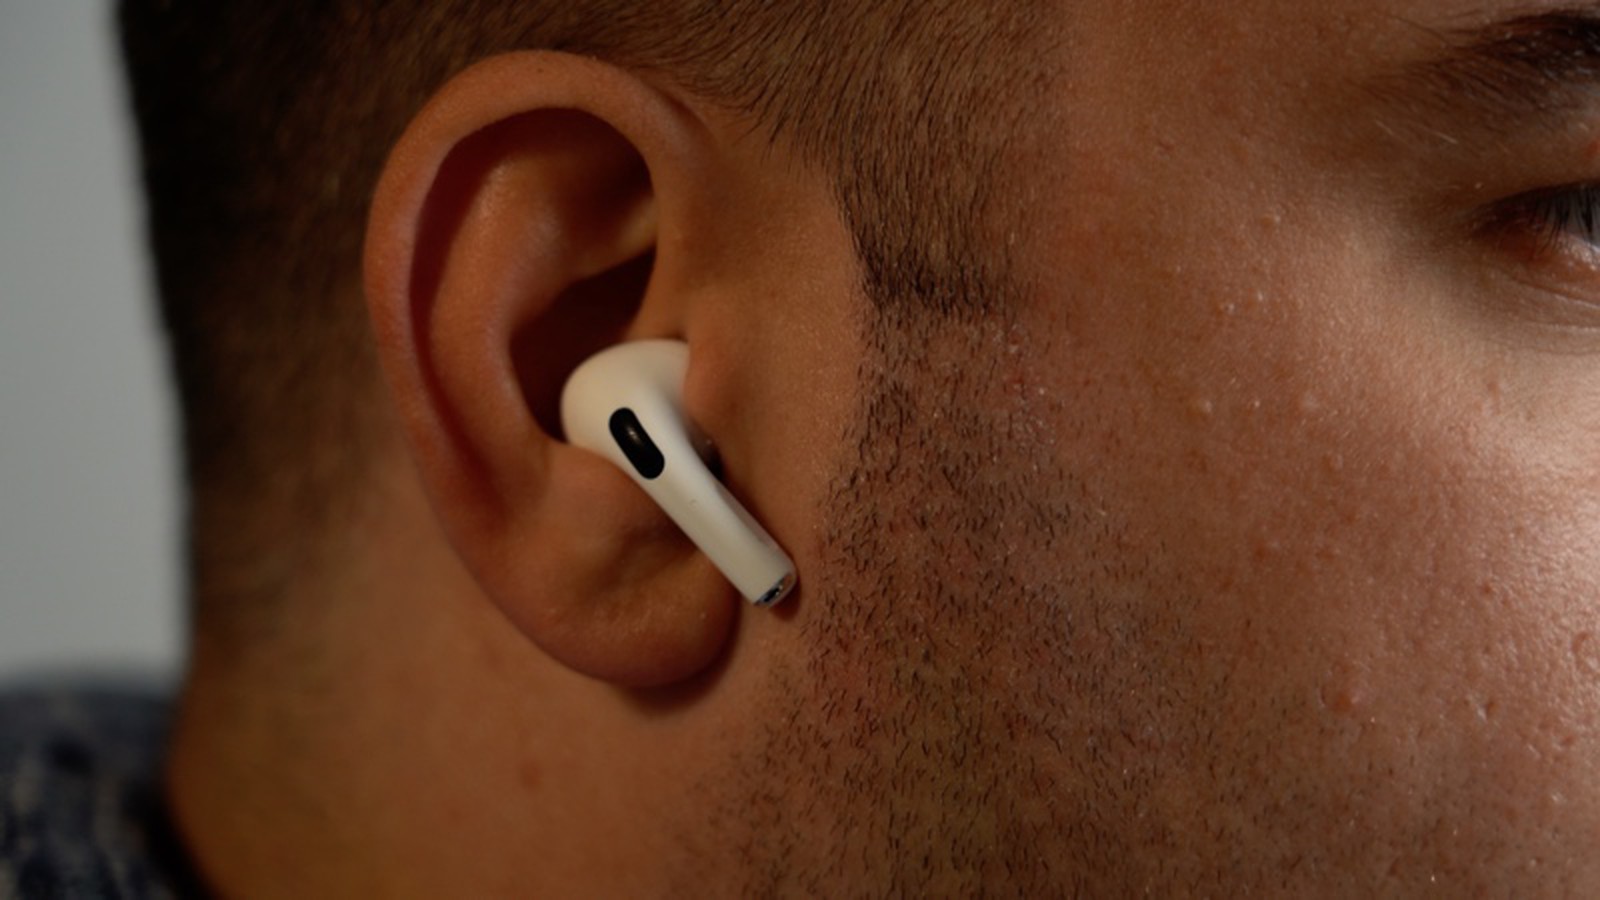 airpods pro fit in ear